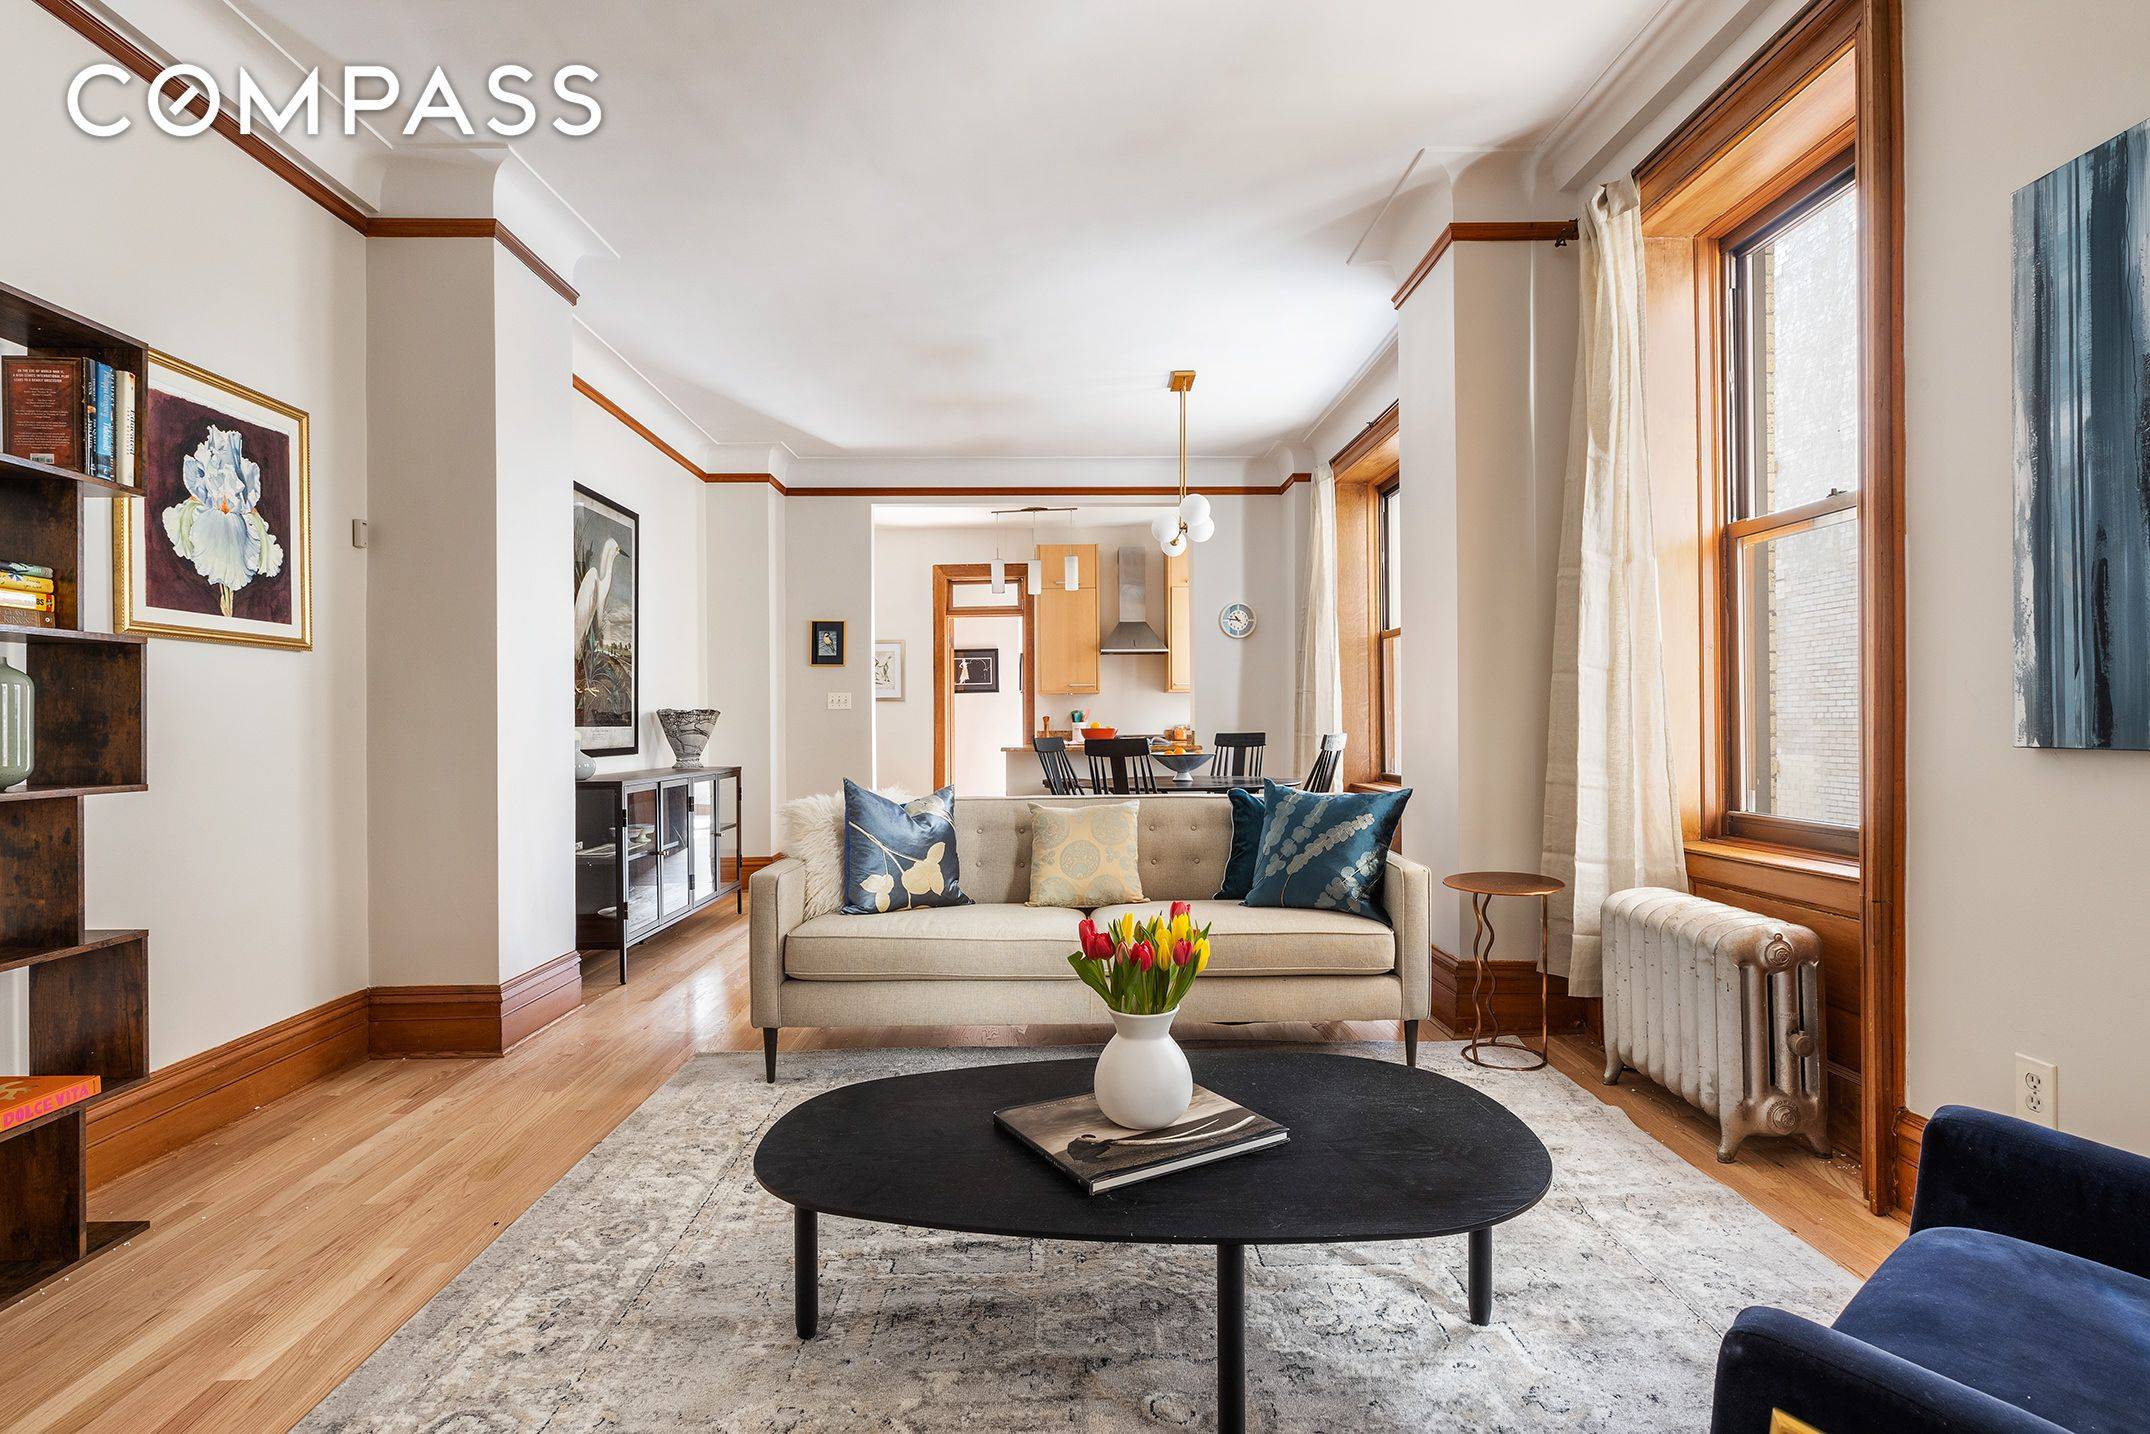 This elegant, pre war 2 bedroom home is absolute perfection.